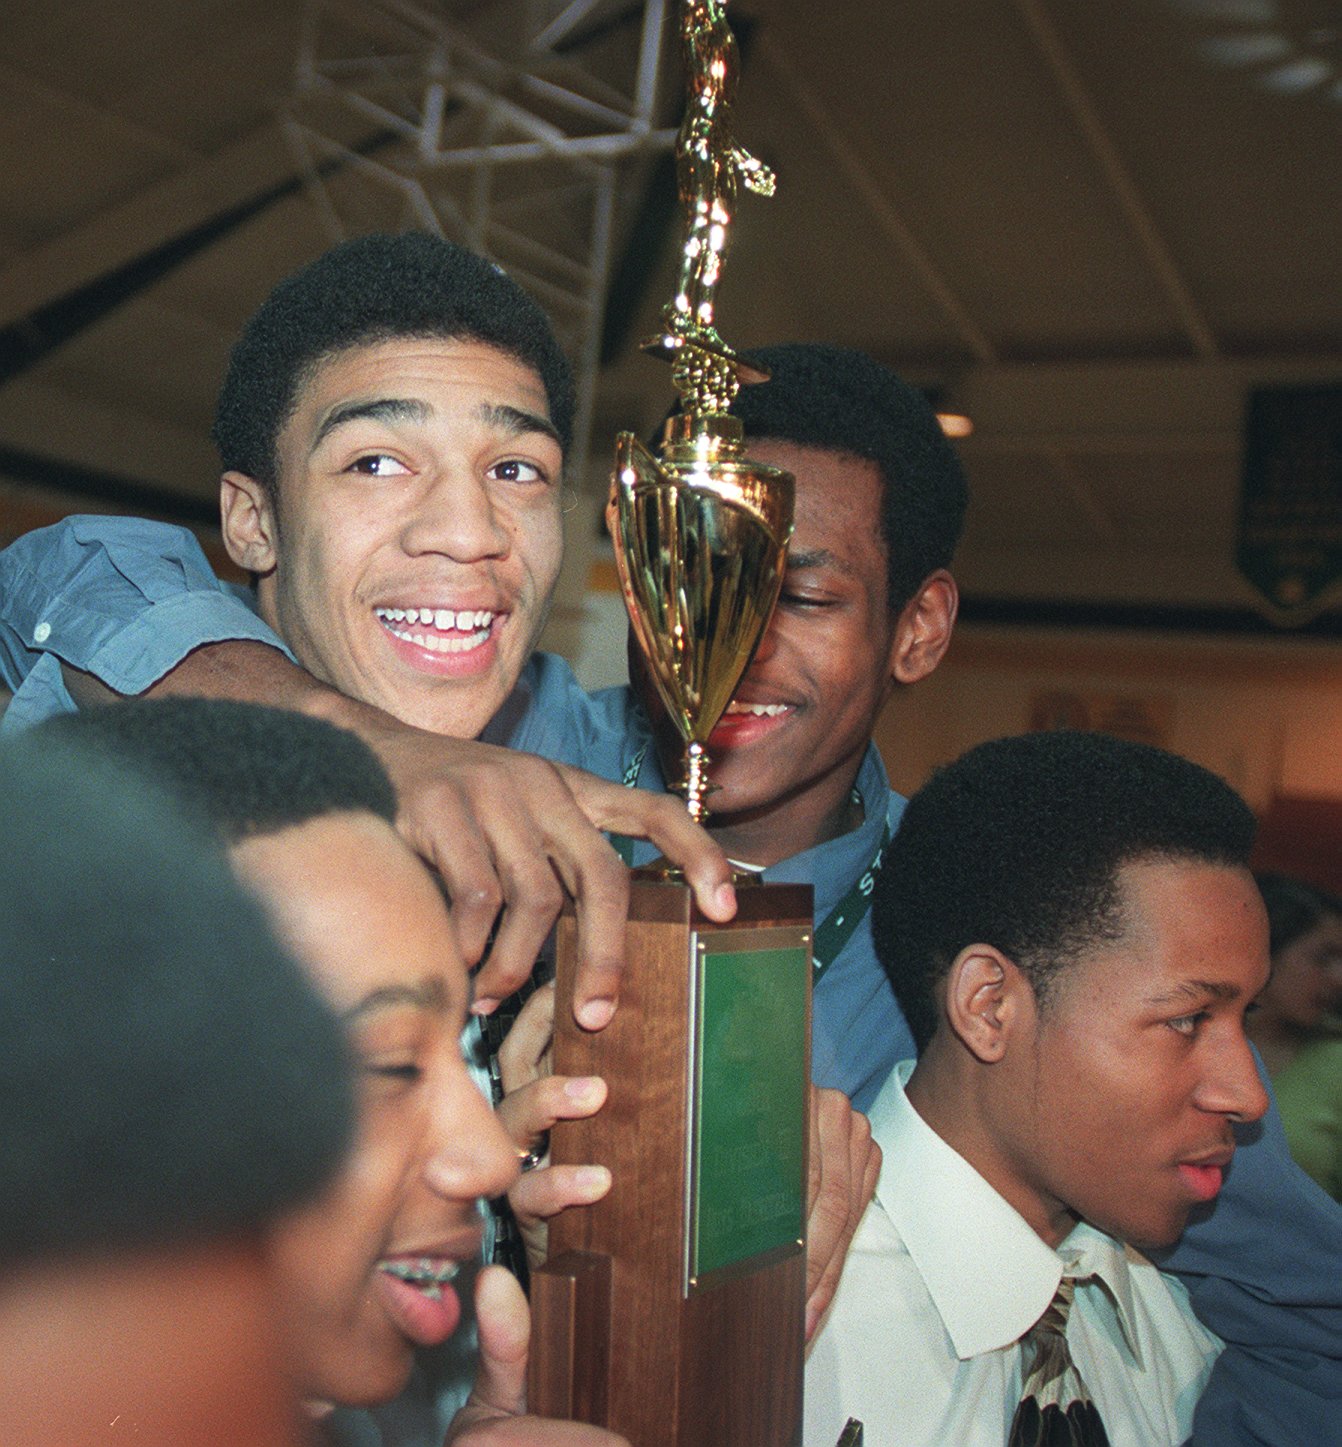 Romeo Travis was all smiles Wednesday afternoon as he held the SVSM state basketball trophy during a rally honoring the team, the cheerleaders, and the state champ wrestling team.  Behind trophy at right is LeBron James.  Wednesday  March 28, 2001  (Bill Kennedy/The Plain Dealer)  